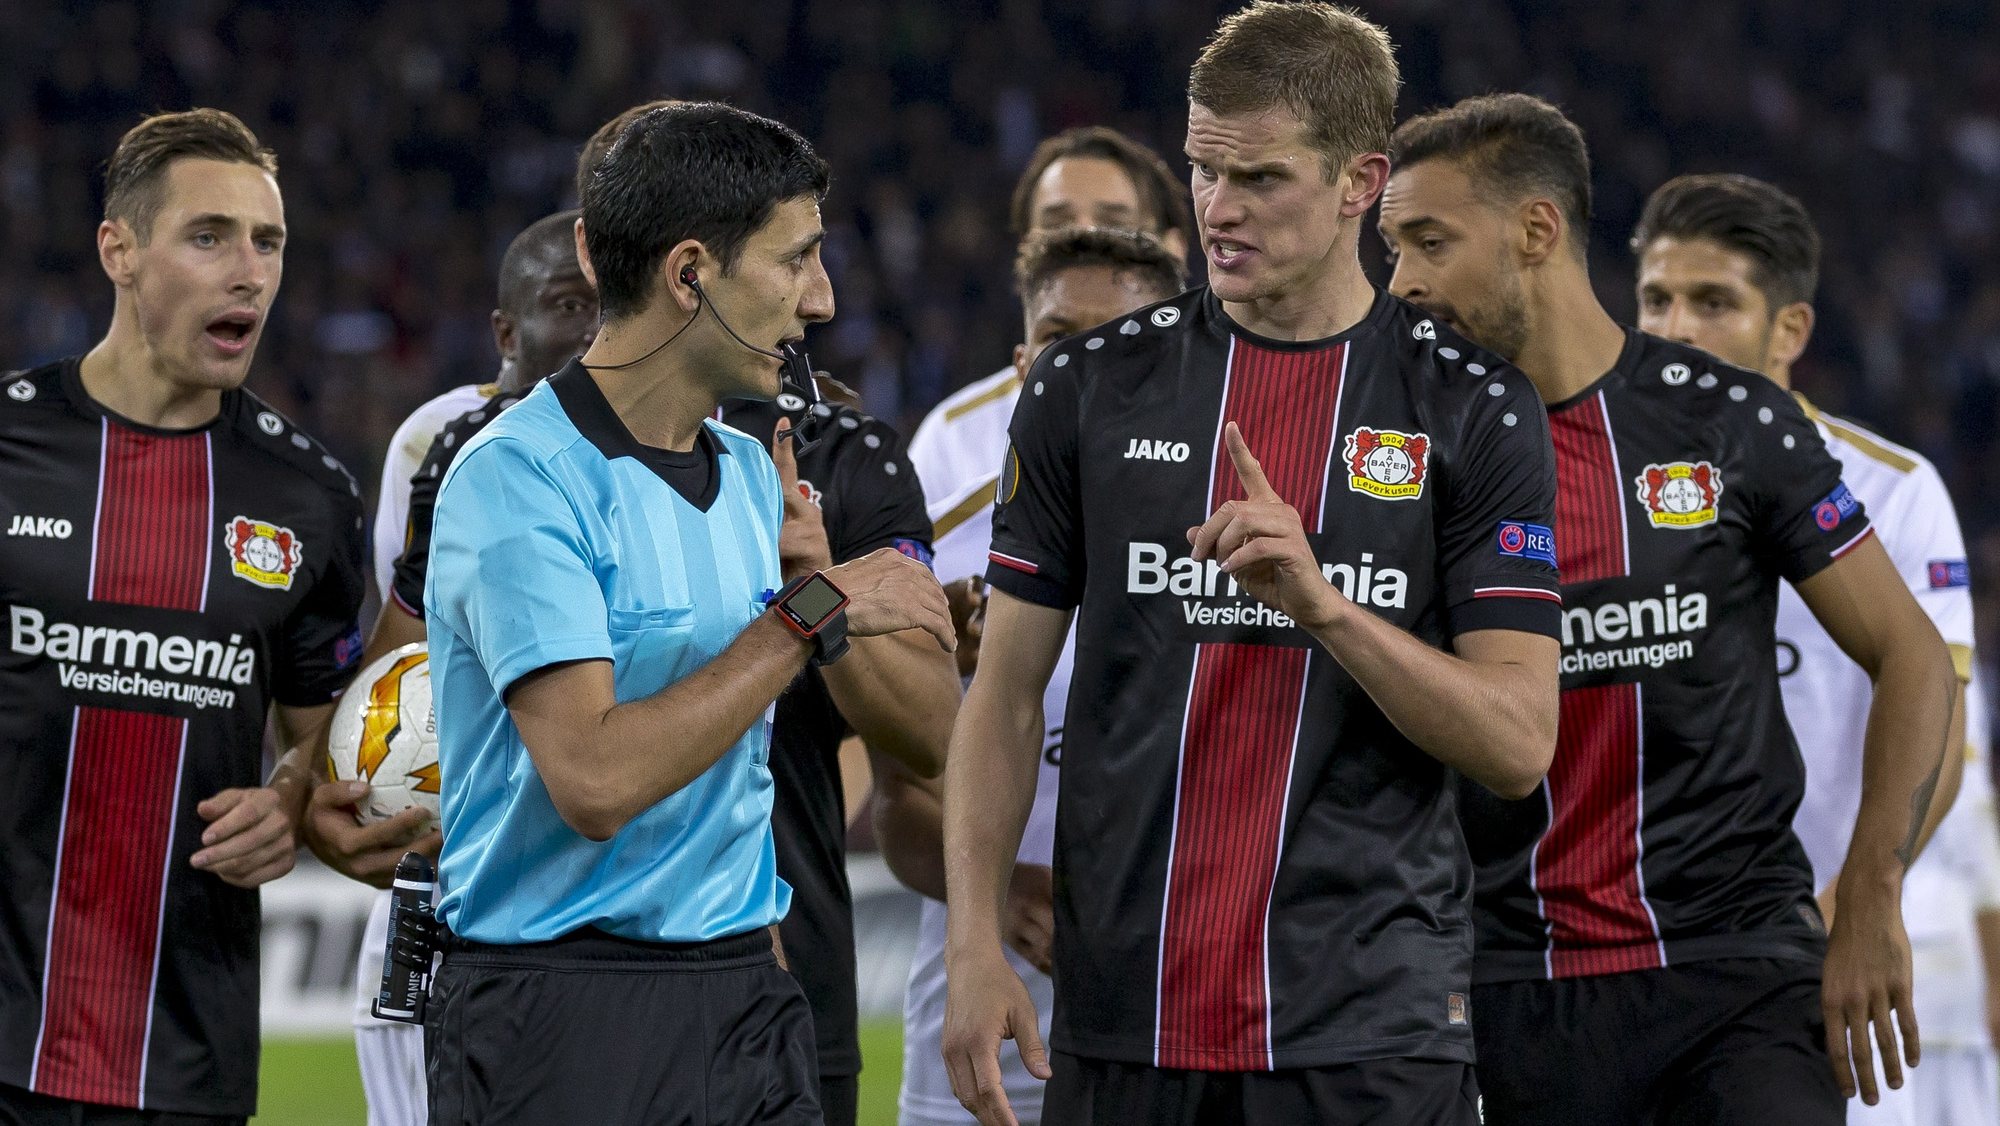 epa07119932 Leverkusen&#039;s Sven Bender, center right, discusses with referee Aliyar Aghayev after his header goal has been disallowed during the UEFA Europe League group stage soccer match between FC Zurich and Bayer 04 Leverkusen at the Letzigrund stadium in Zurich, Switzerland, 25 October 2018.  EPA/PATRICK B. KRAEMER